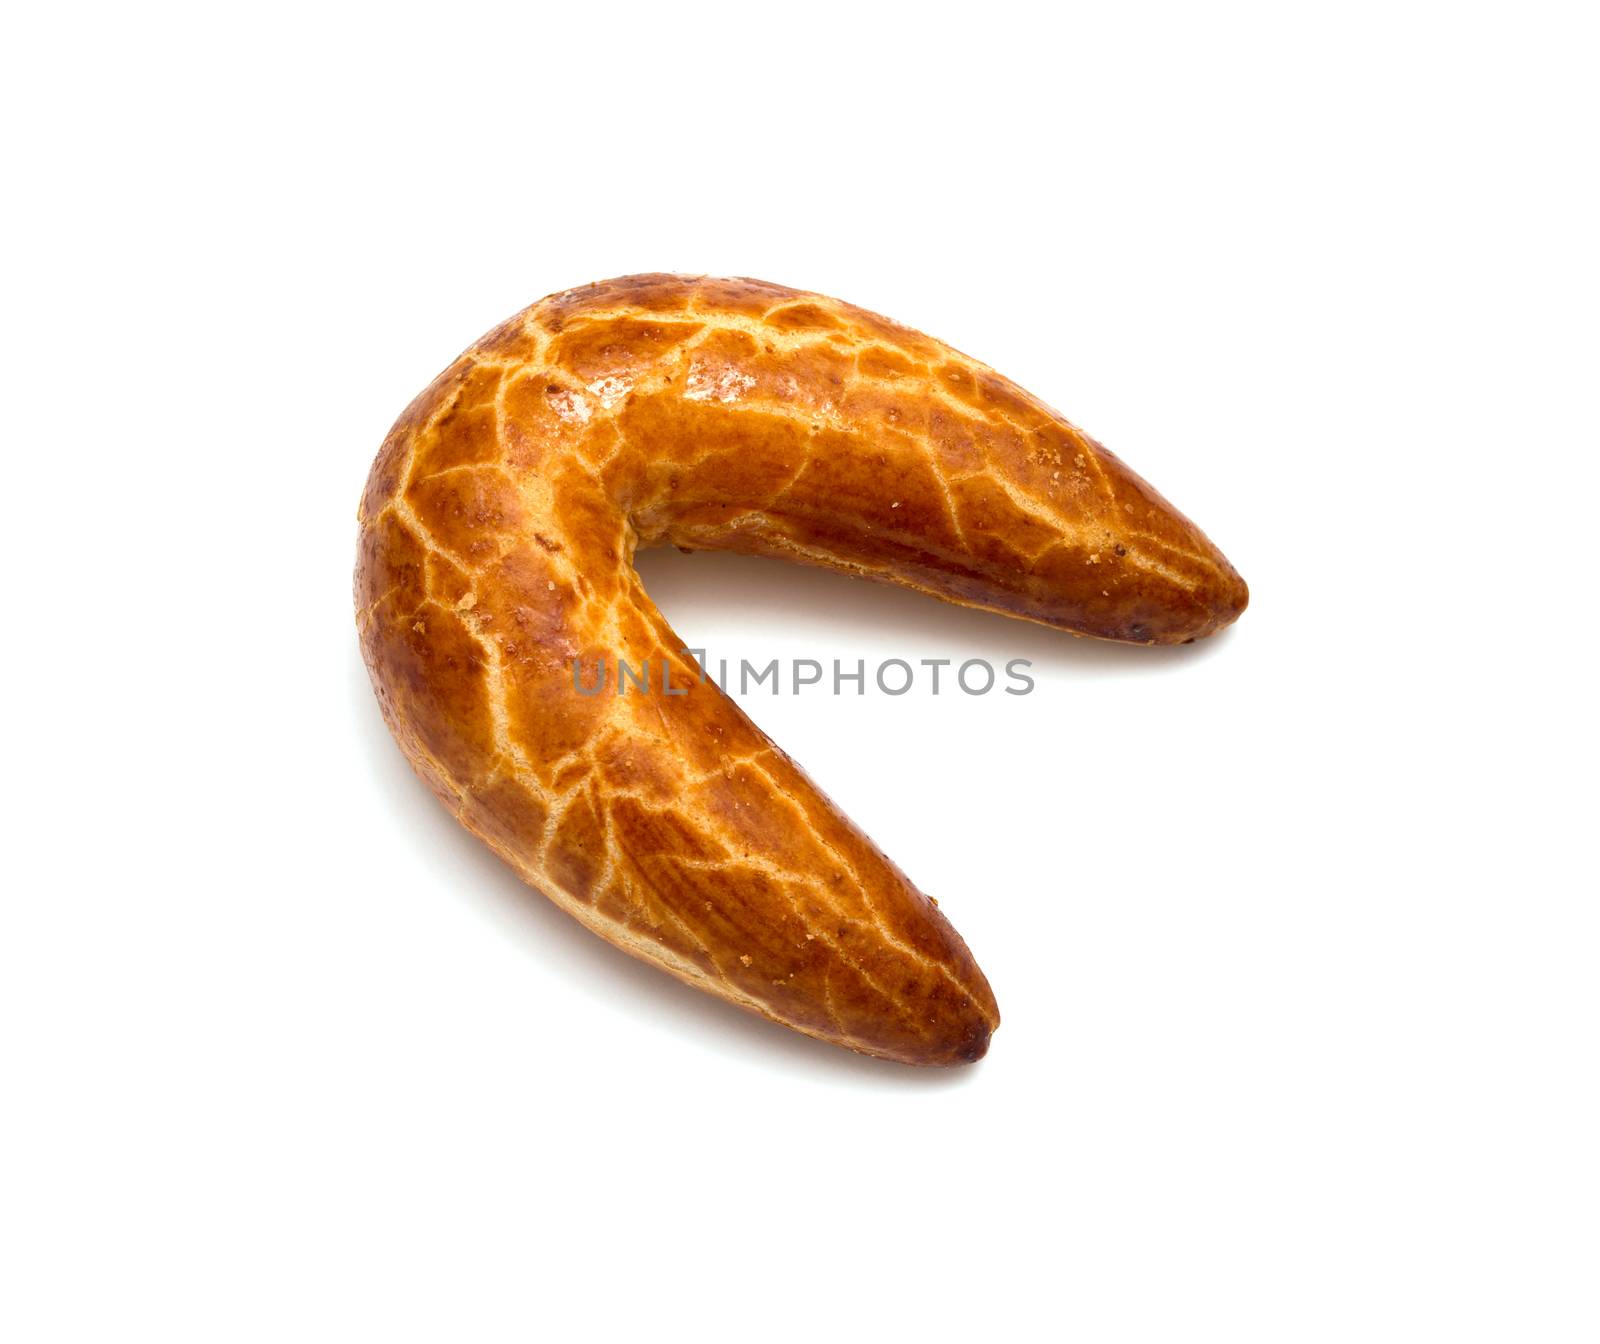 Fresh Bagel Isolated on a White Background